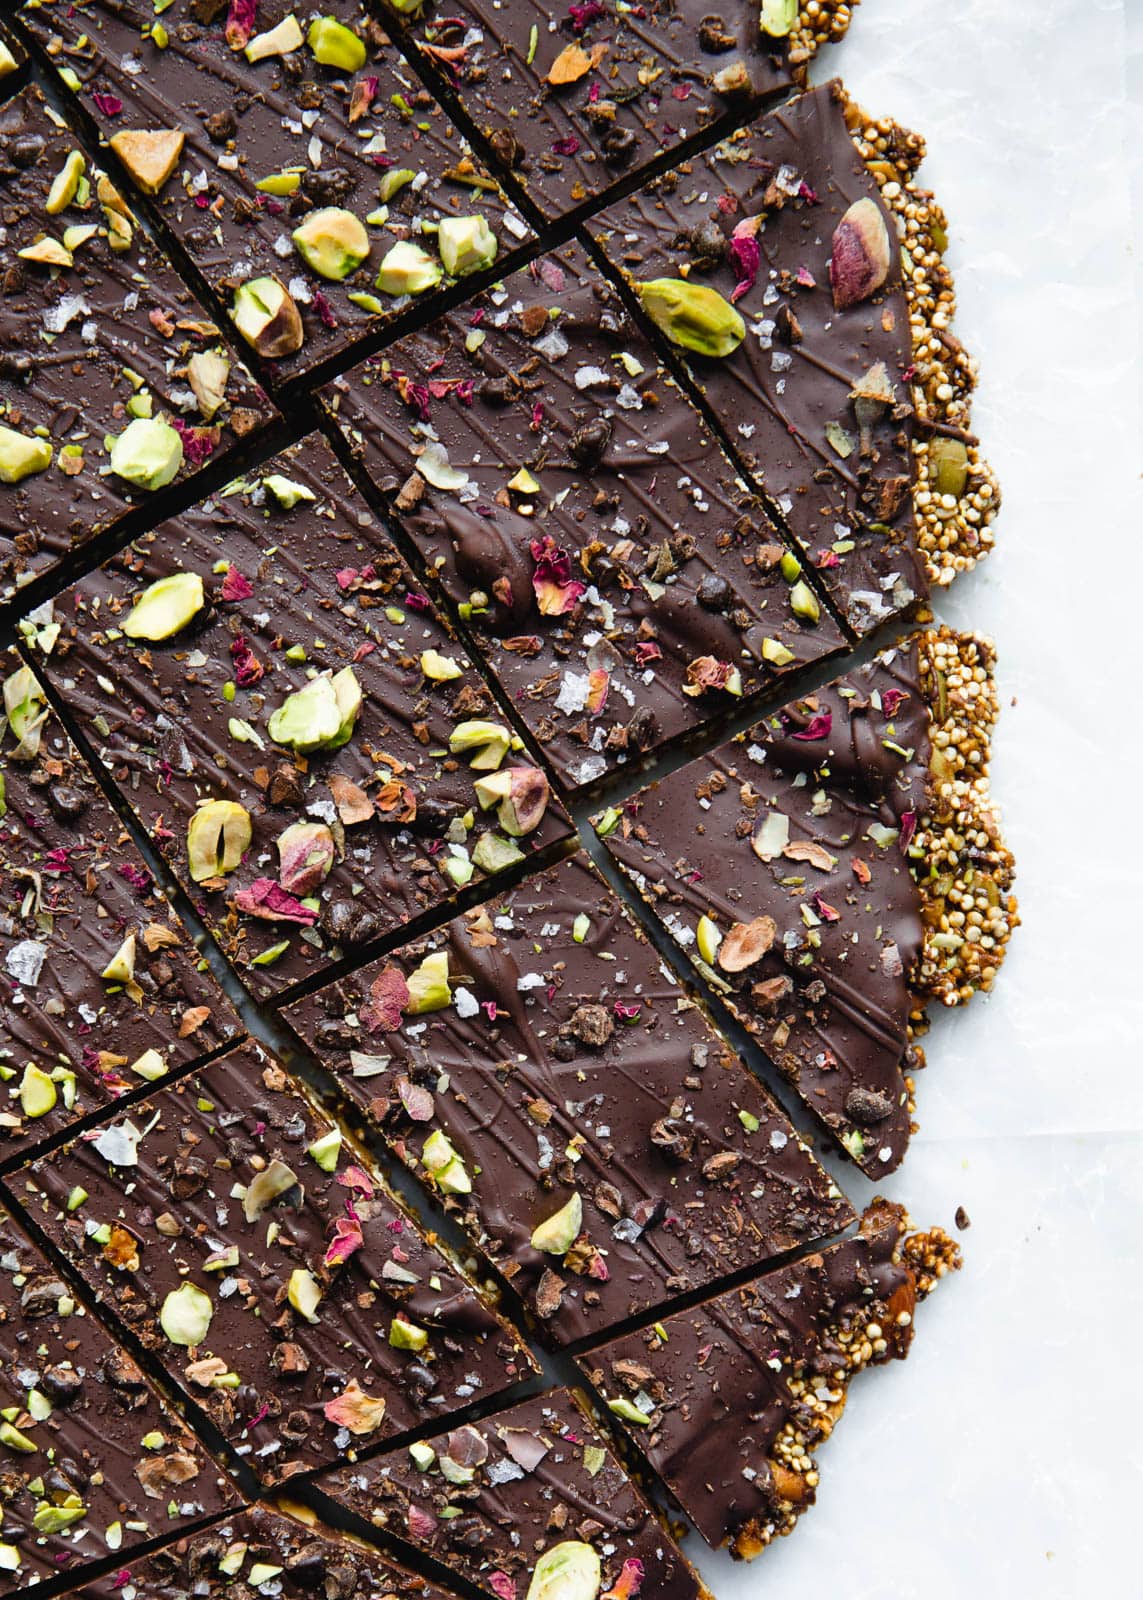 A healthier alternative to a chocolate bar, this Quinoa Chocolate Bark is filled with nuts and seeds to keep you full all afternoon!